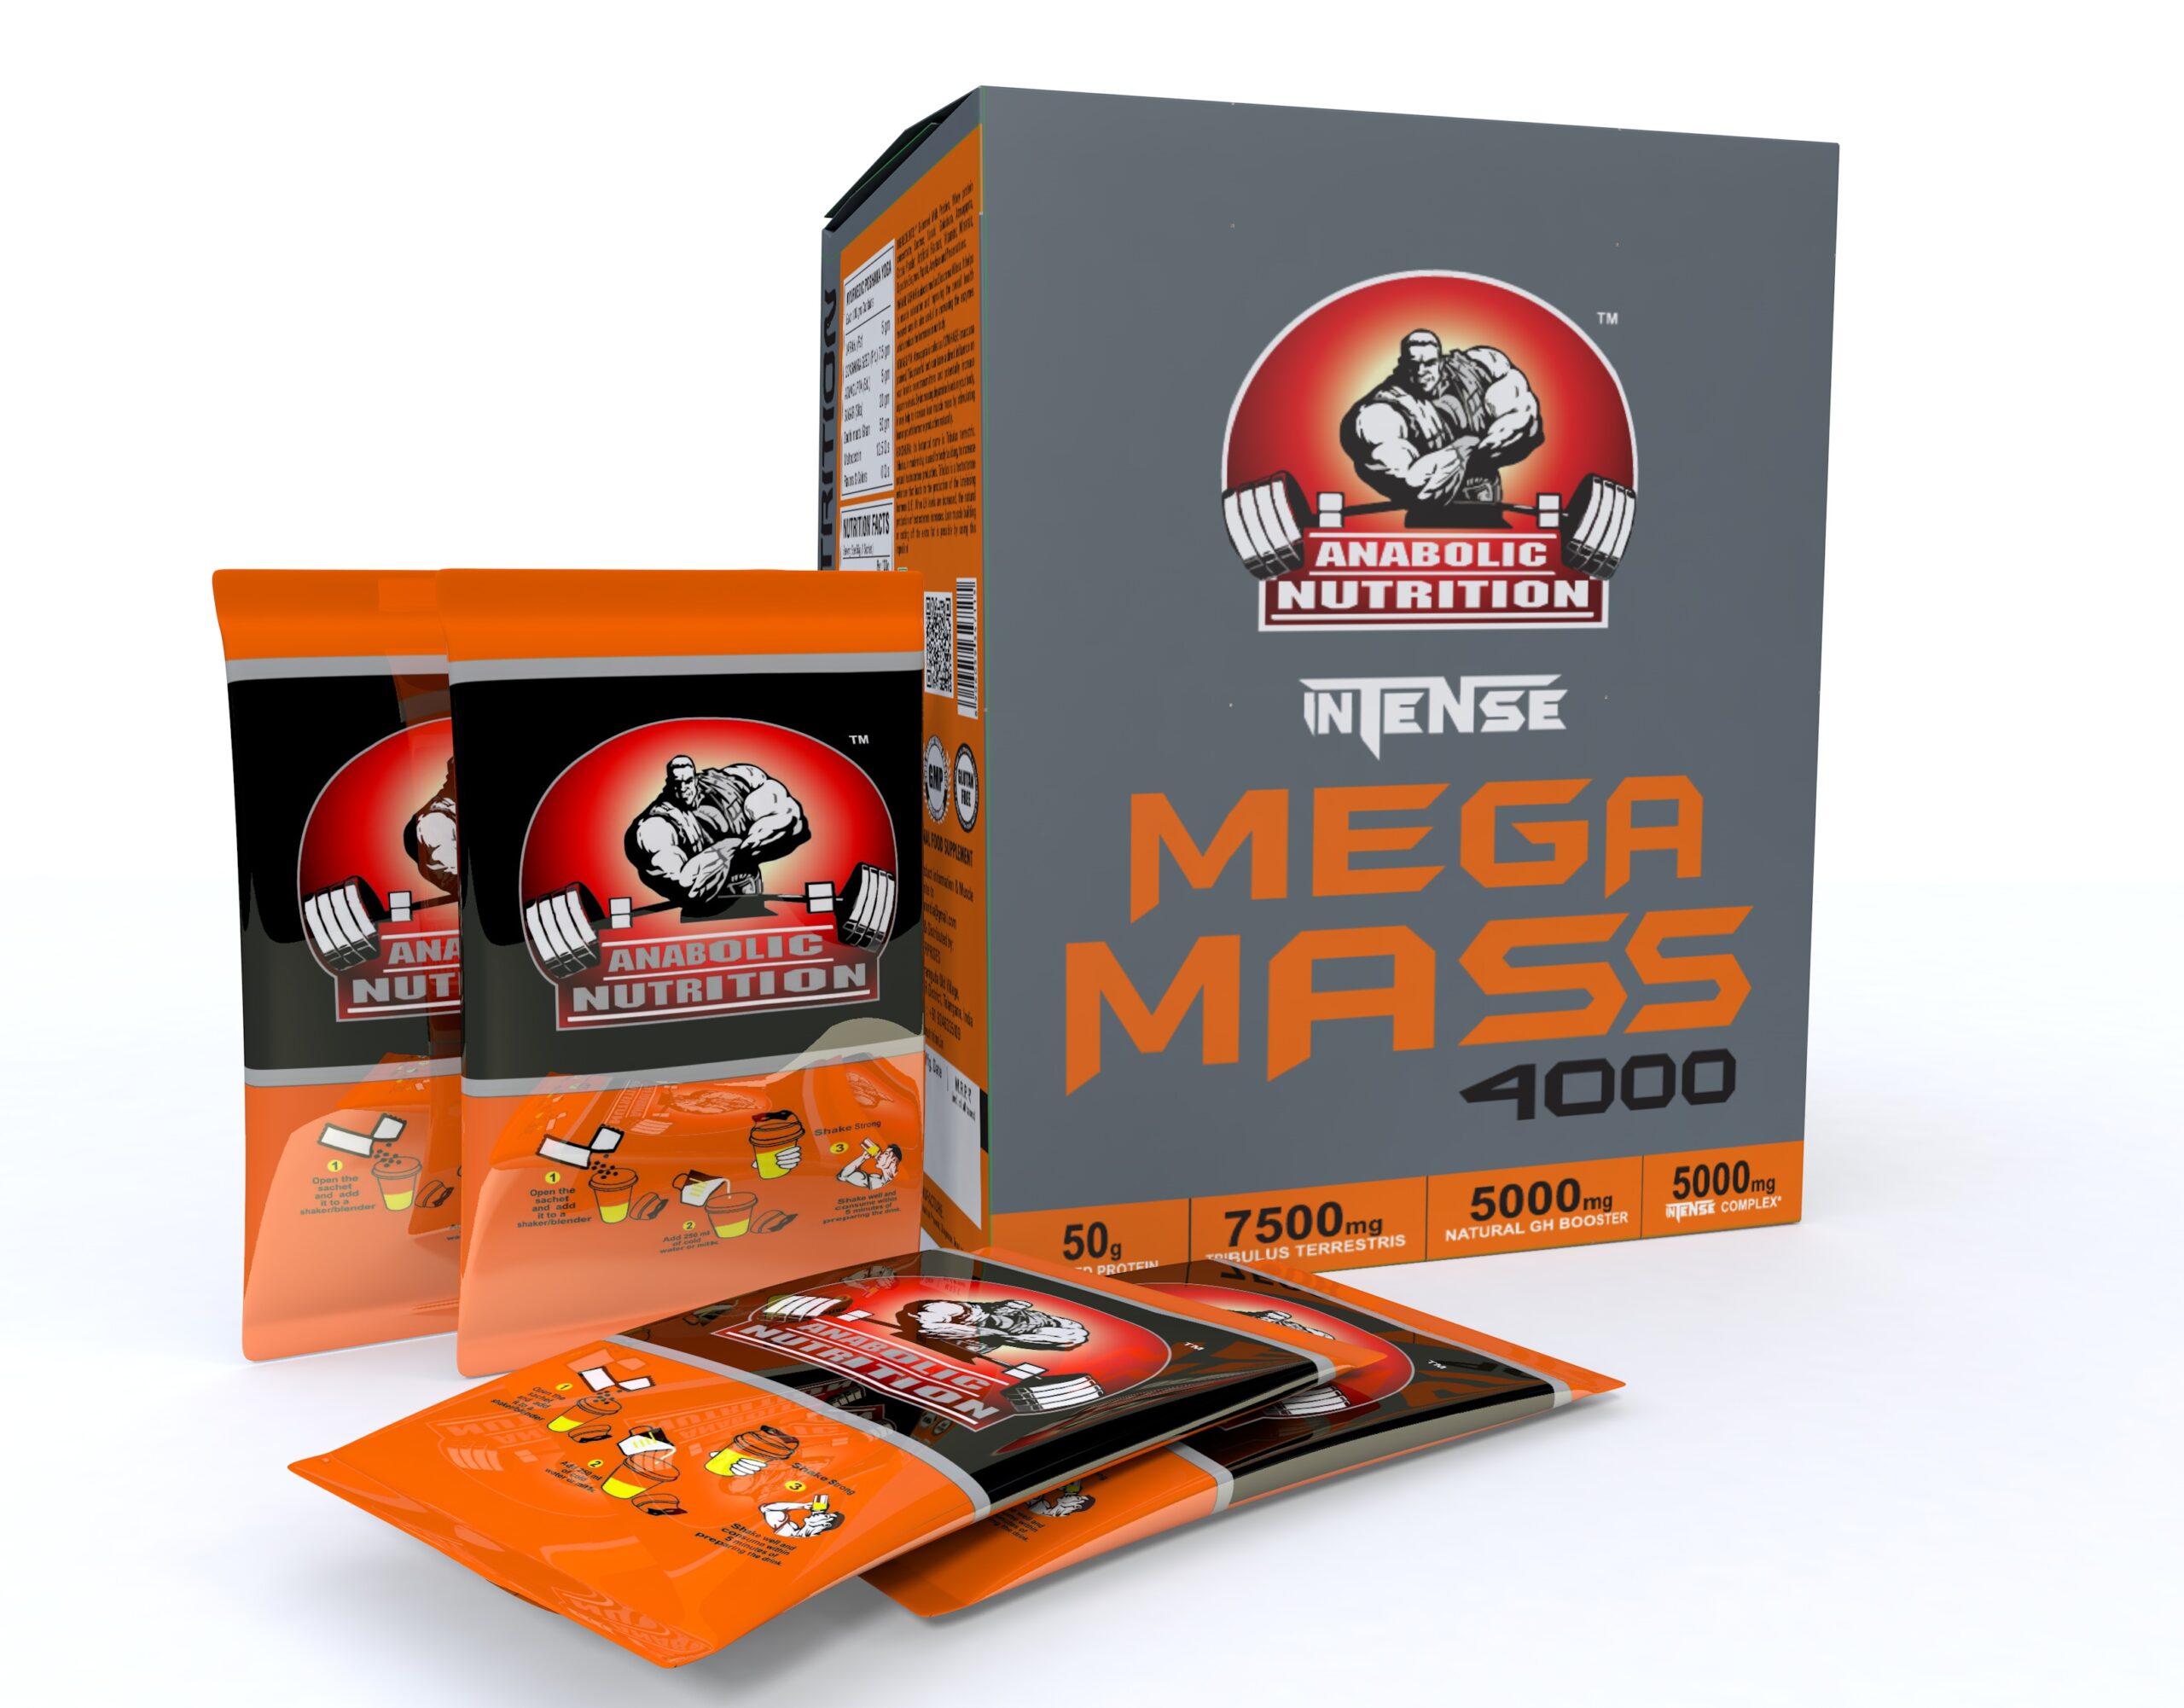 Anabolic Nutrition Intense Mega Mass 4000 at Rs 1650/piece